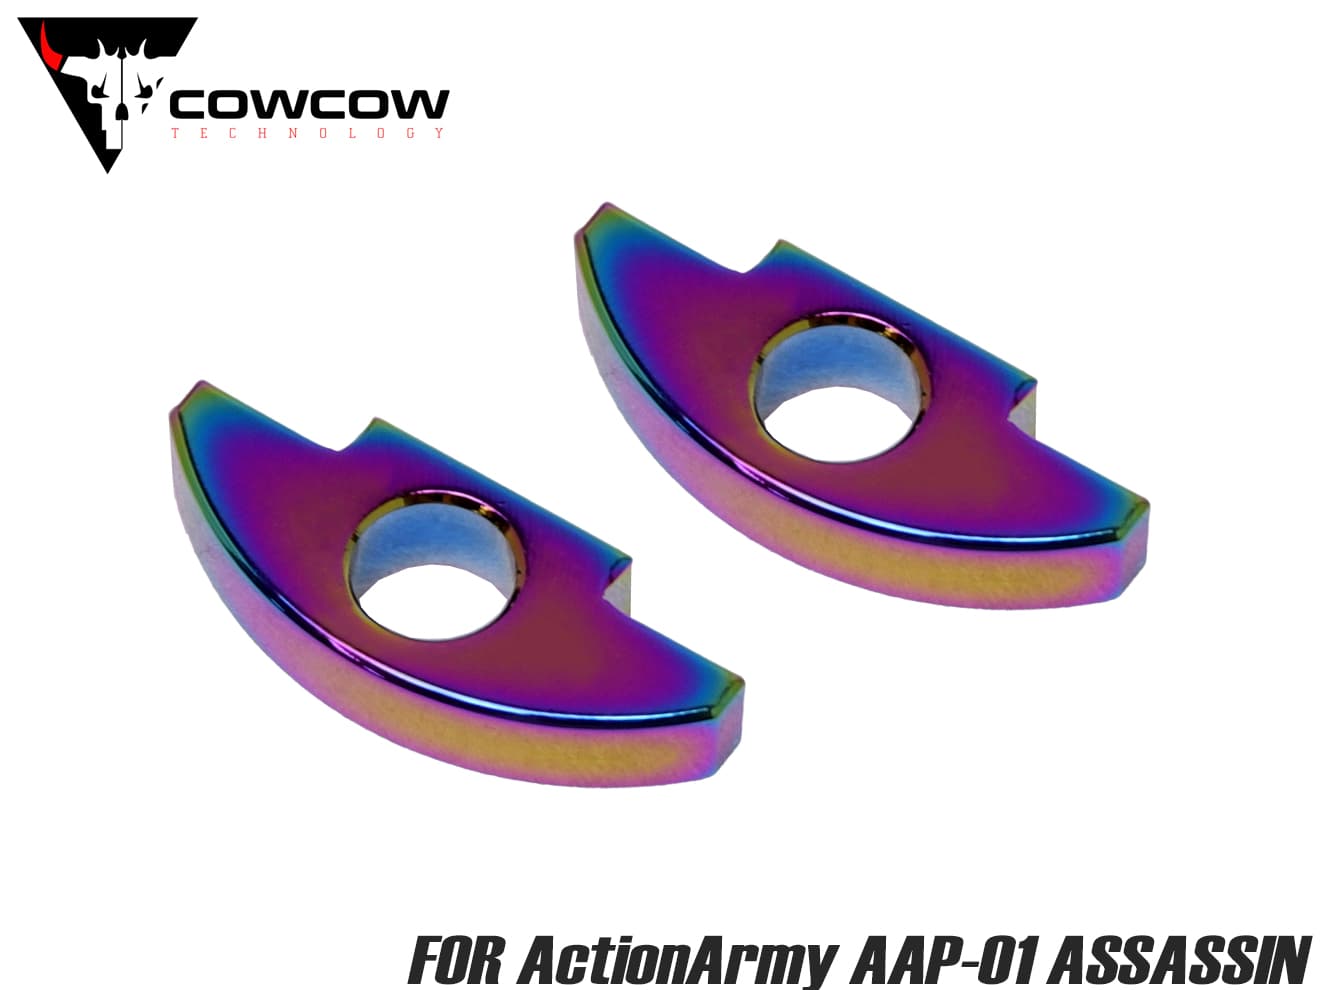 COWCOW TECHNOLOGY A7075 CNC 強化ローディングノズルフルセット for